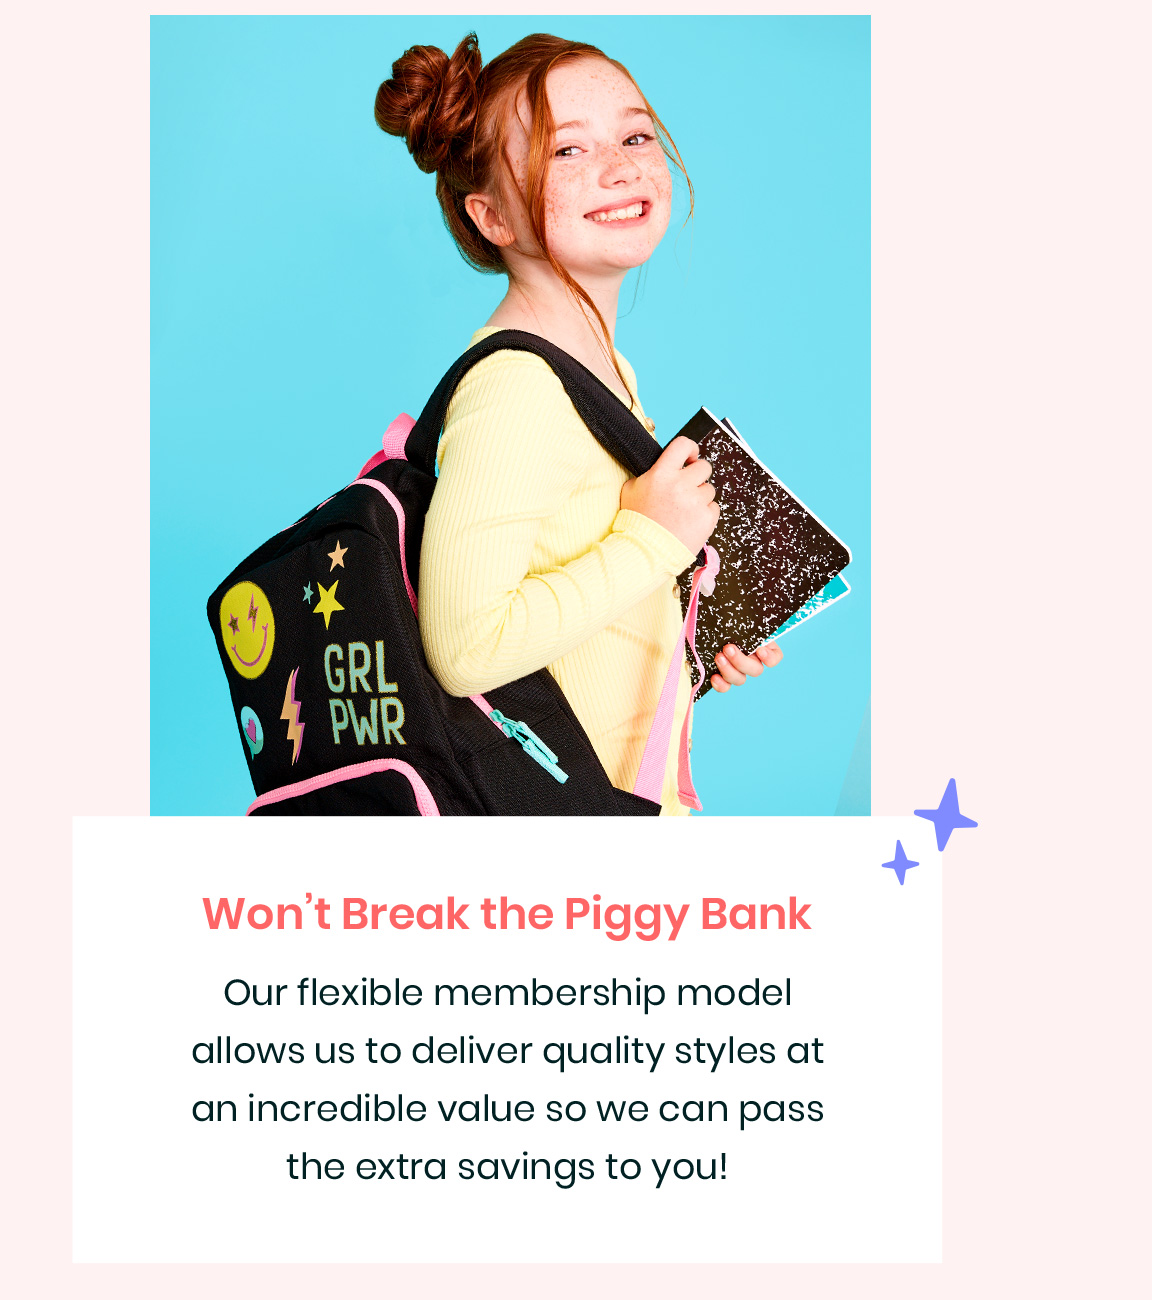 Won‘t Break the Piggy Bank - Out flexible membership model allows us to deliver quality styles at an incredible value so we can pass the extra savings to you!